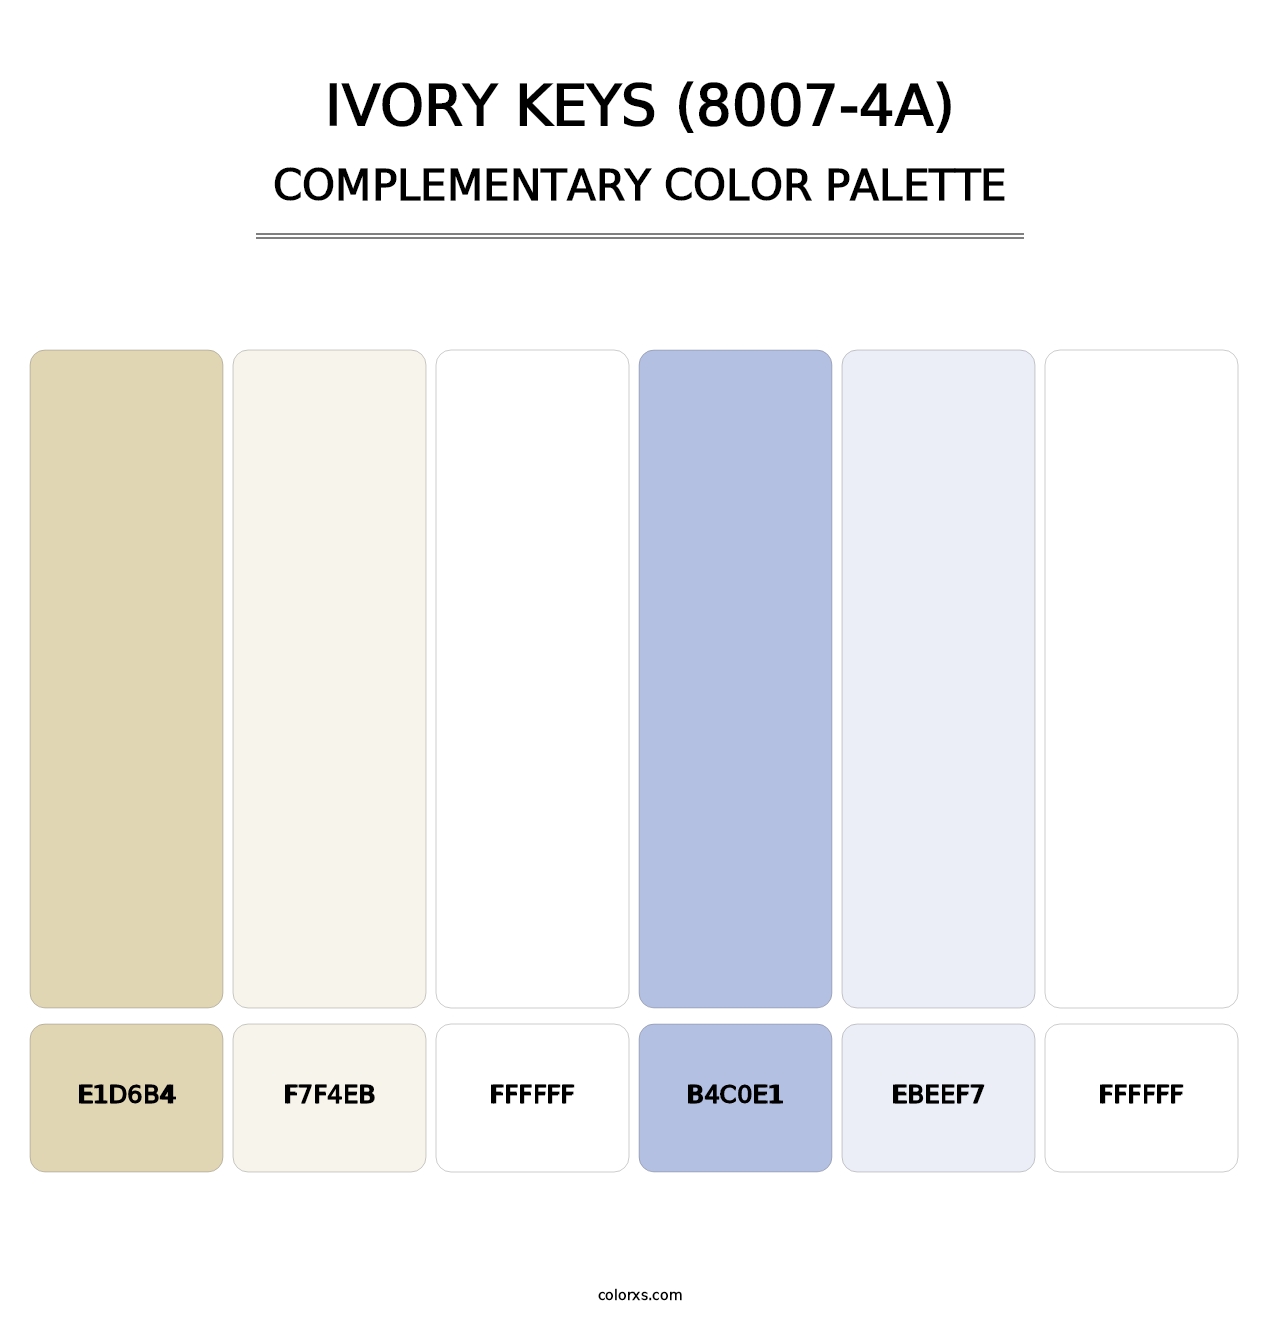 Ivory Keys (8007-4A) - Complementary Color Palette